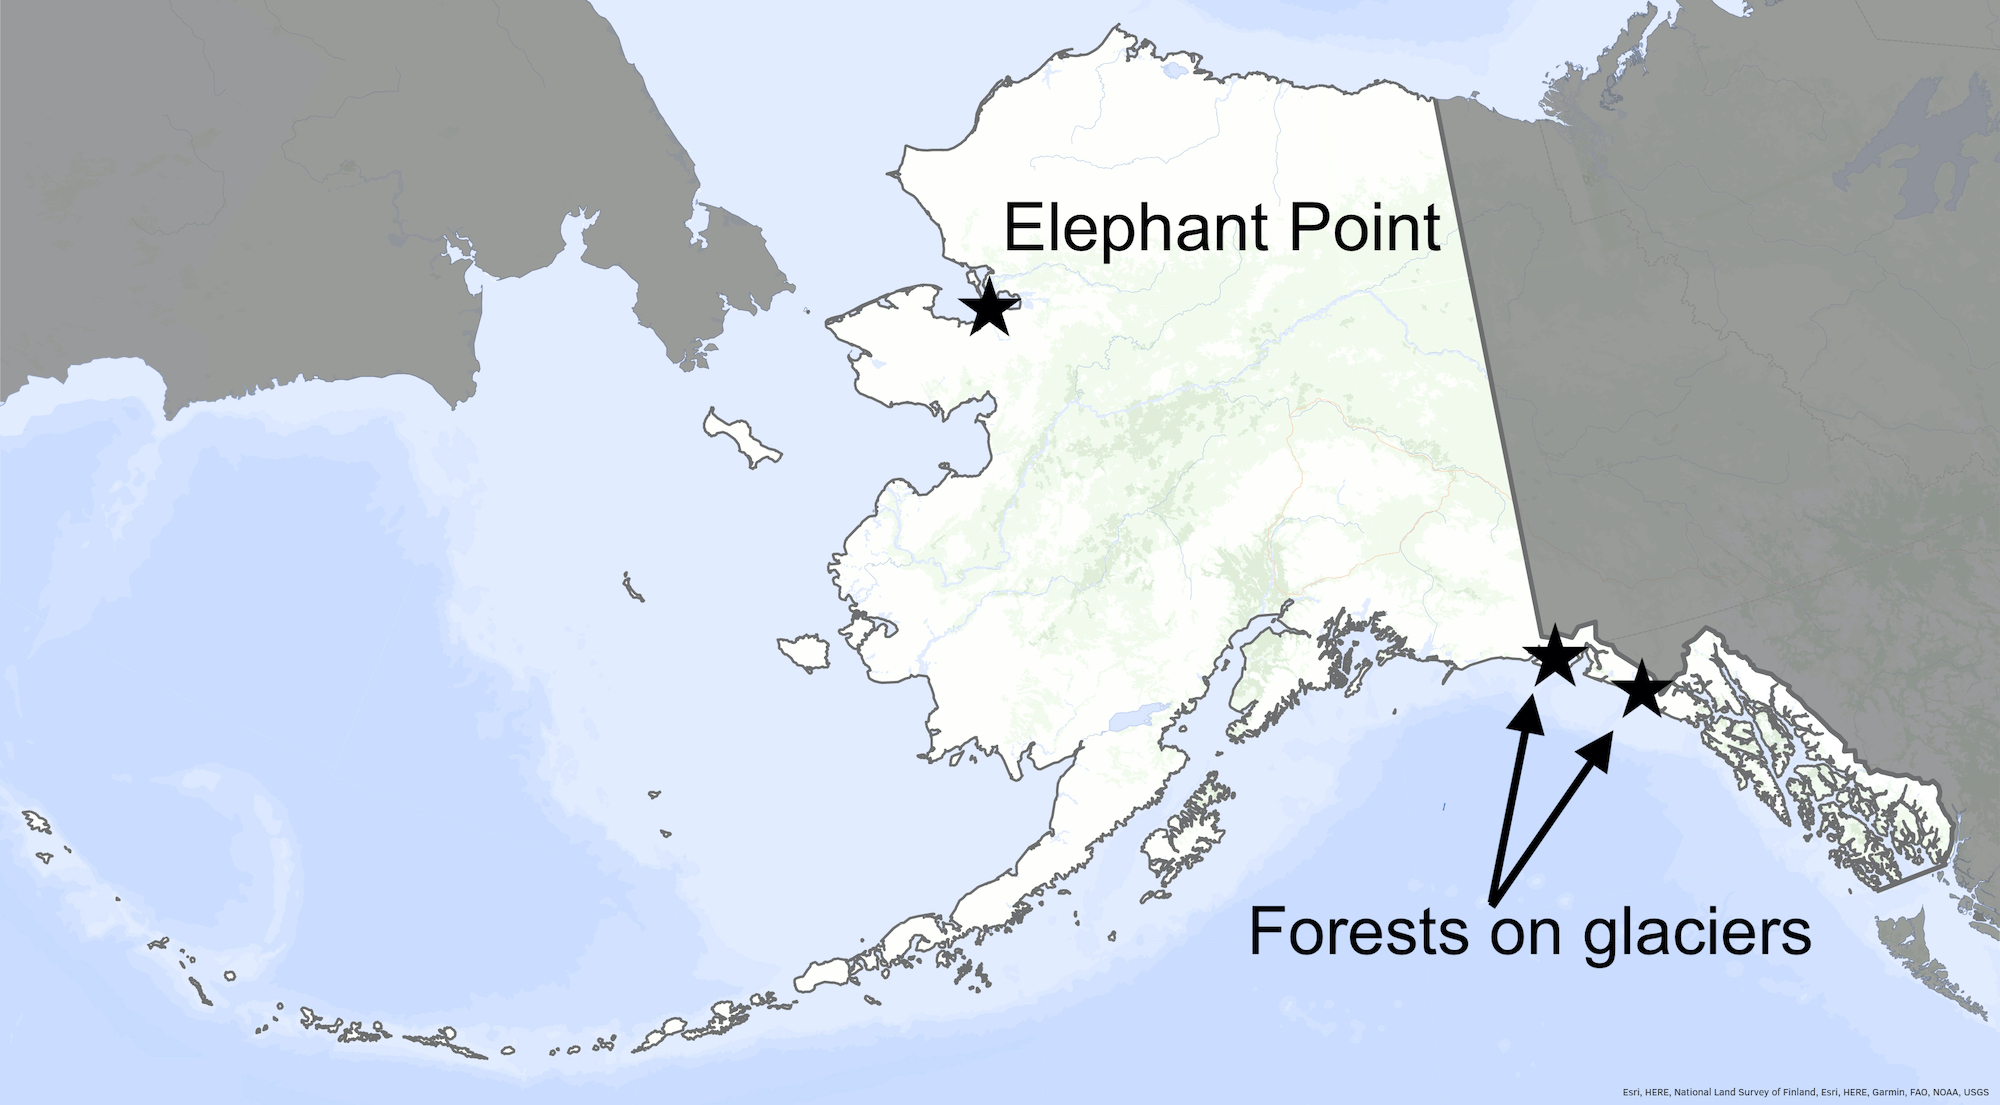 An Alaska map with markings for the locations of Elephant Point in northwestern Alaska and two glaciers in southern Alaska.